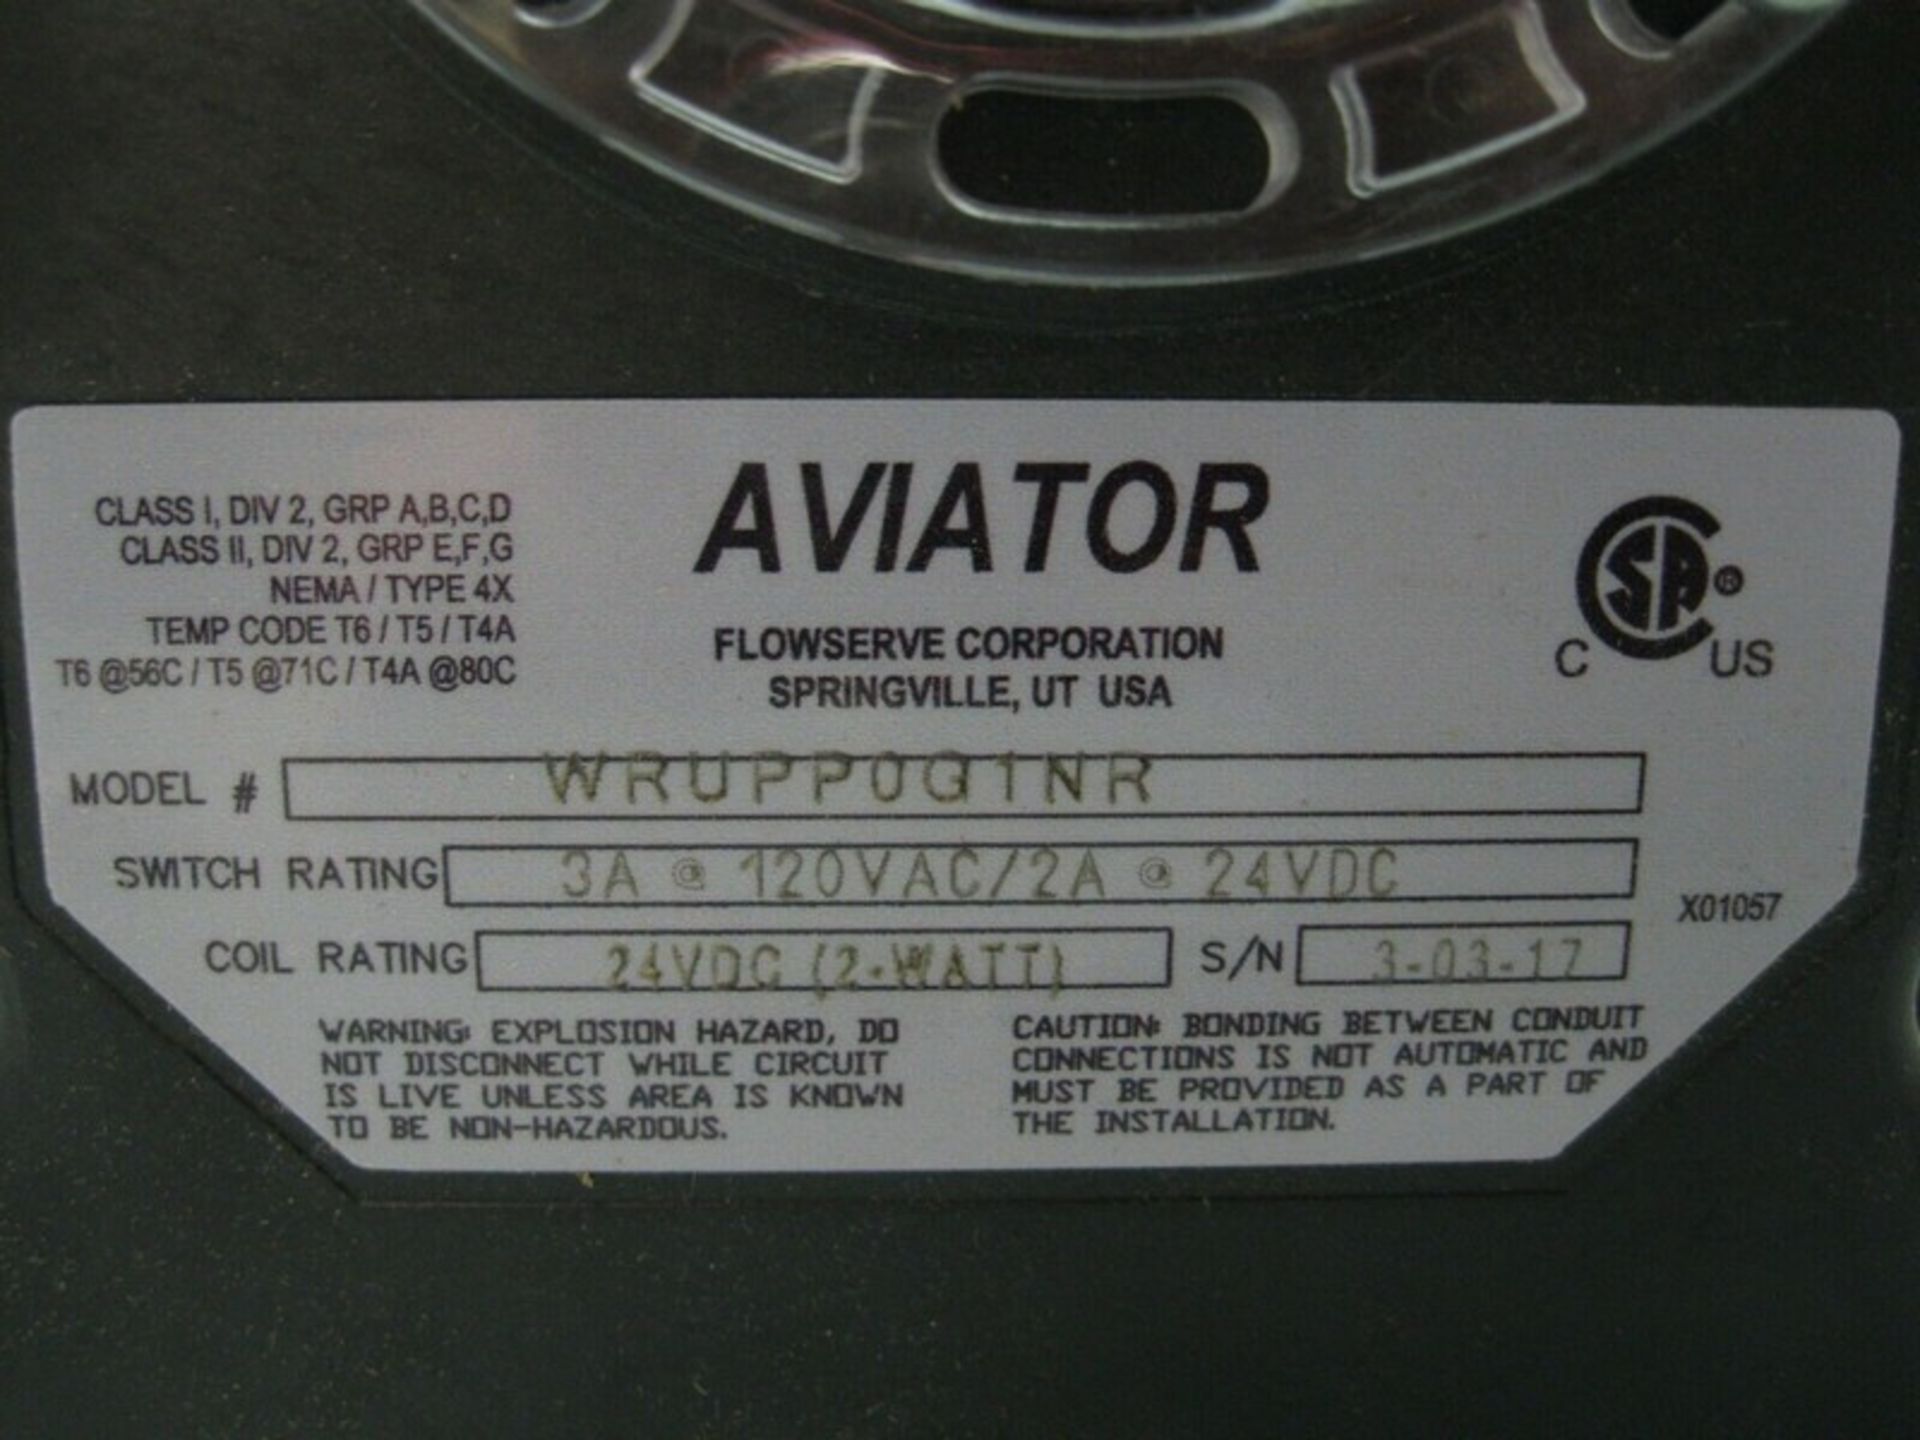 Flowserve Automax Aviator WRUPP0G1NR Valve Controller NEW (NOTE: Packing and Palletizing Can Be - Image 6 of 6